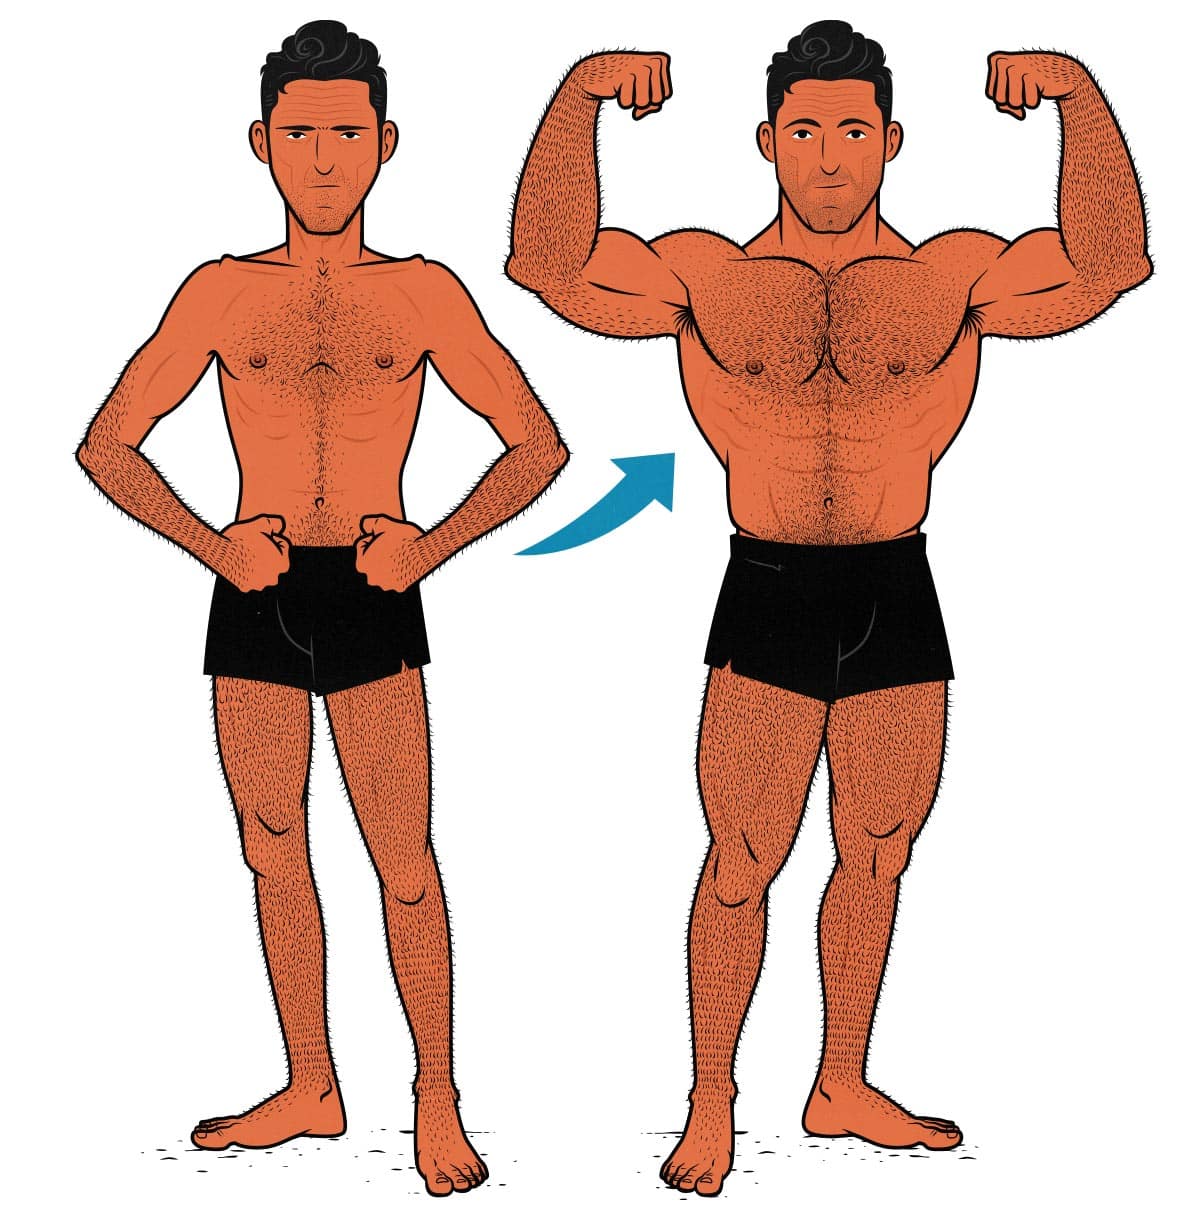 Illustration of an old skinny man bulking up and becoming muscular.